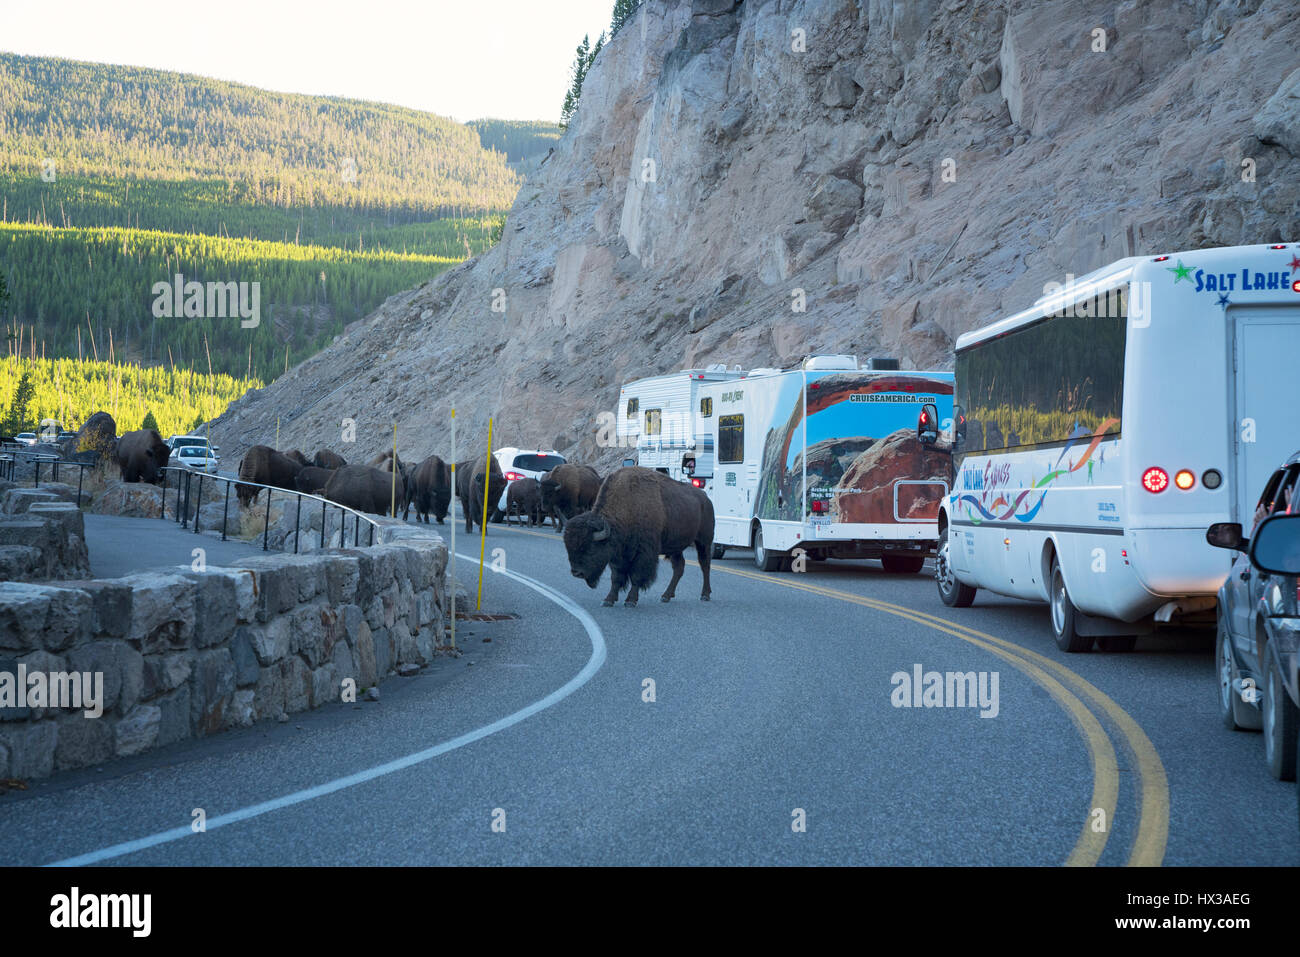 Blocage Buffalo road. Le Parc National de Yellowstone, Wyoming Banque D'Images